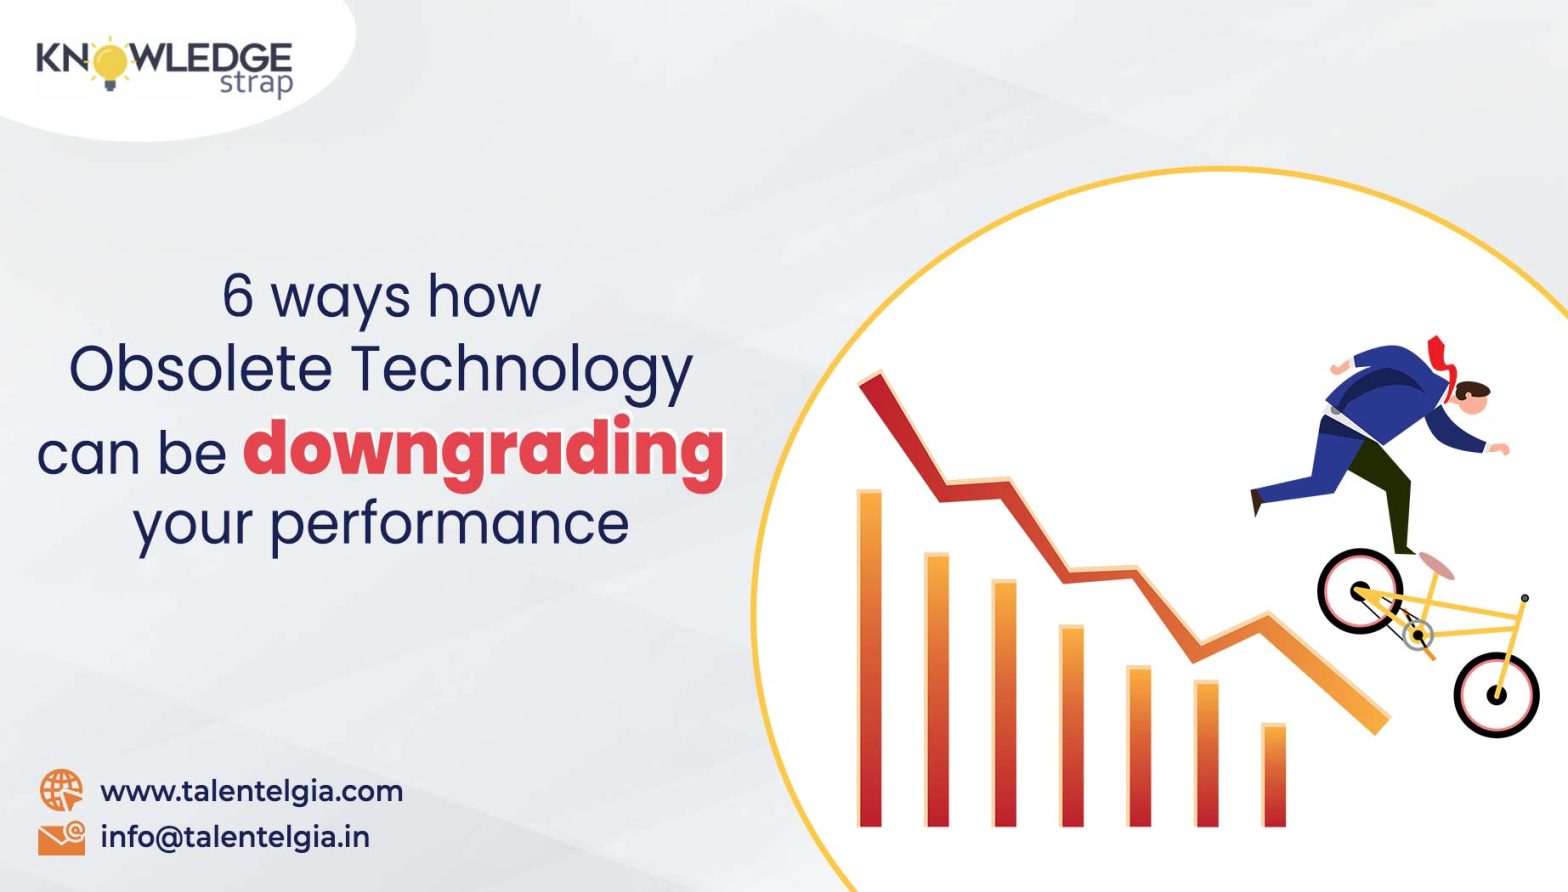 6 ways how Obsolete Technology can be downgrading your performance